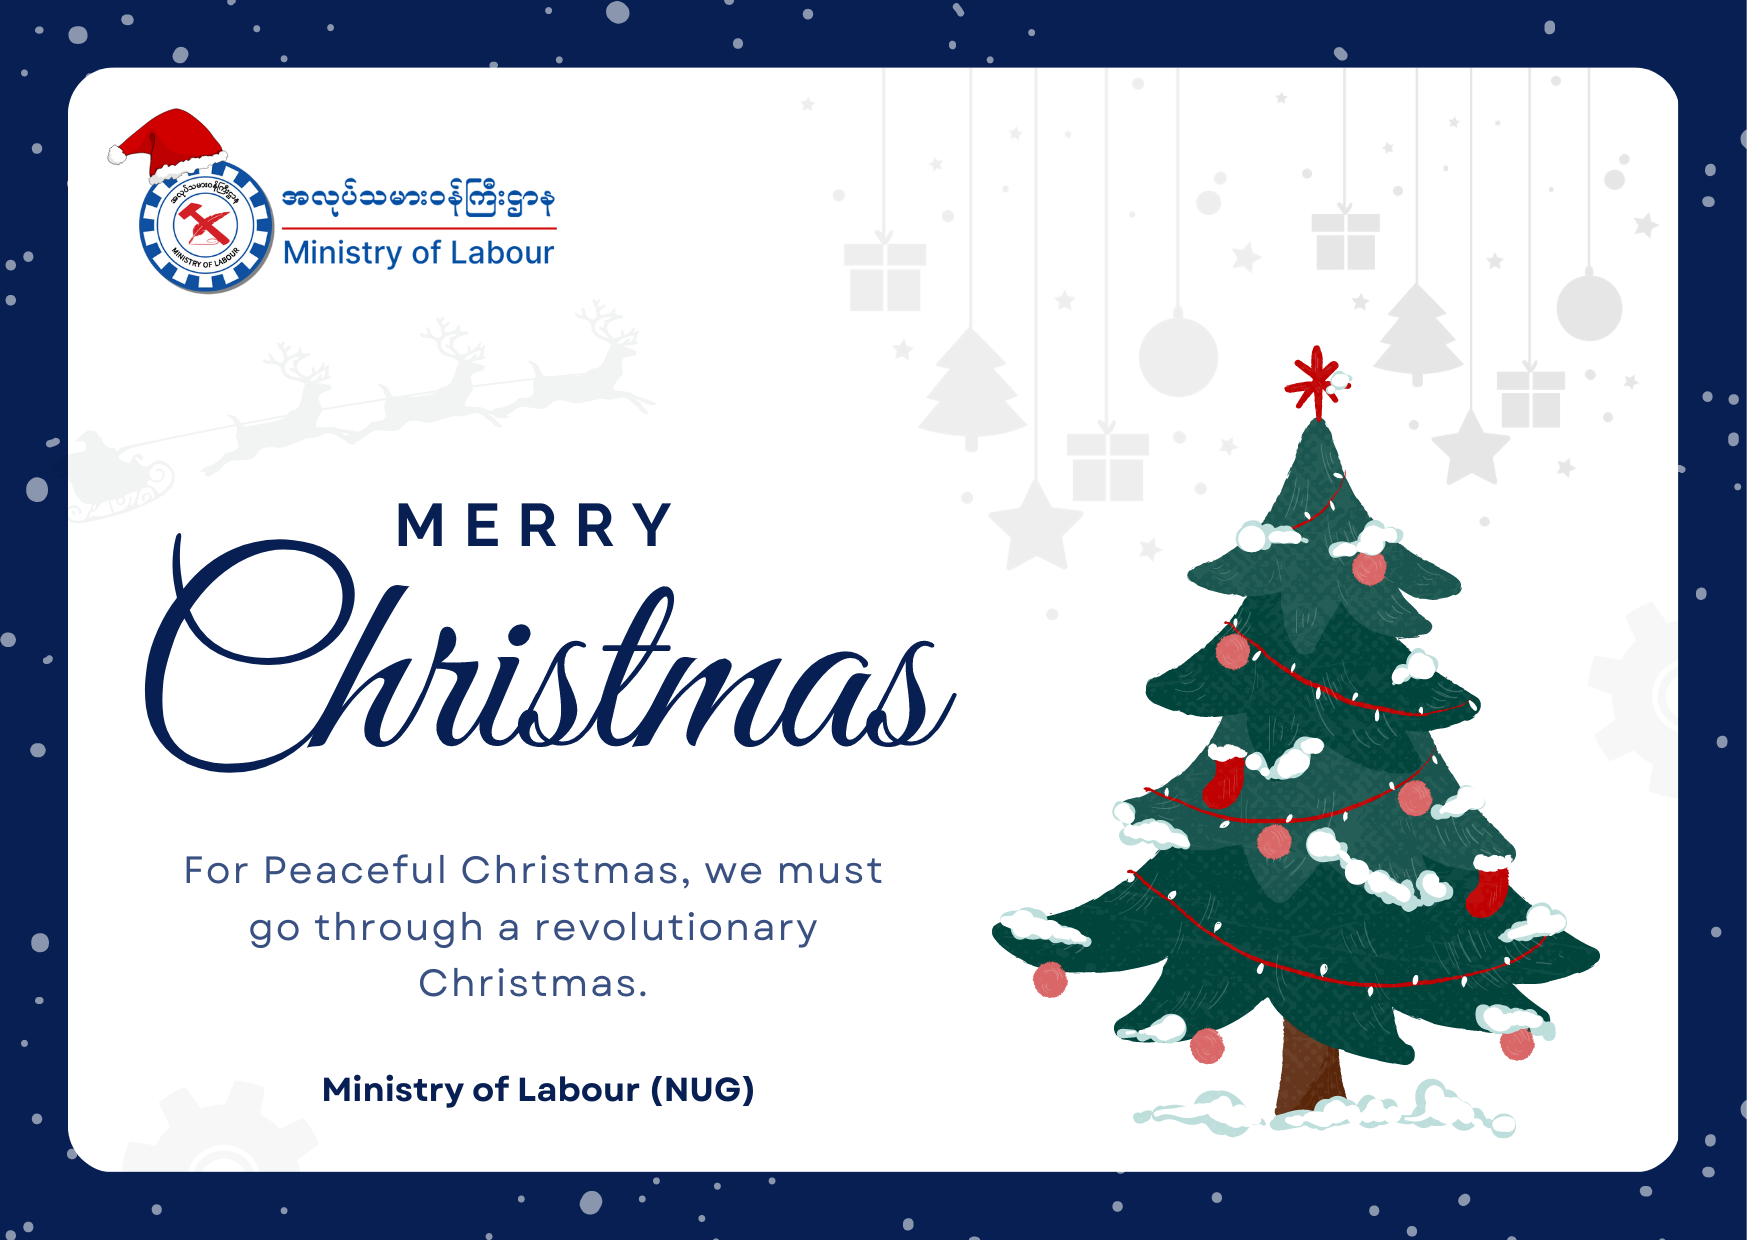 Ministry of Labour https://mol.nugmyanmar.org/my/news/merry-christmas-2022/